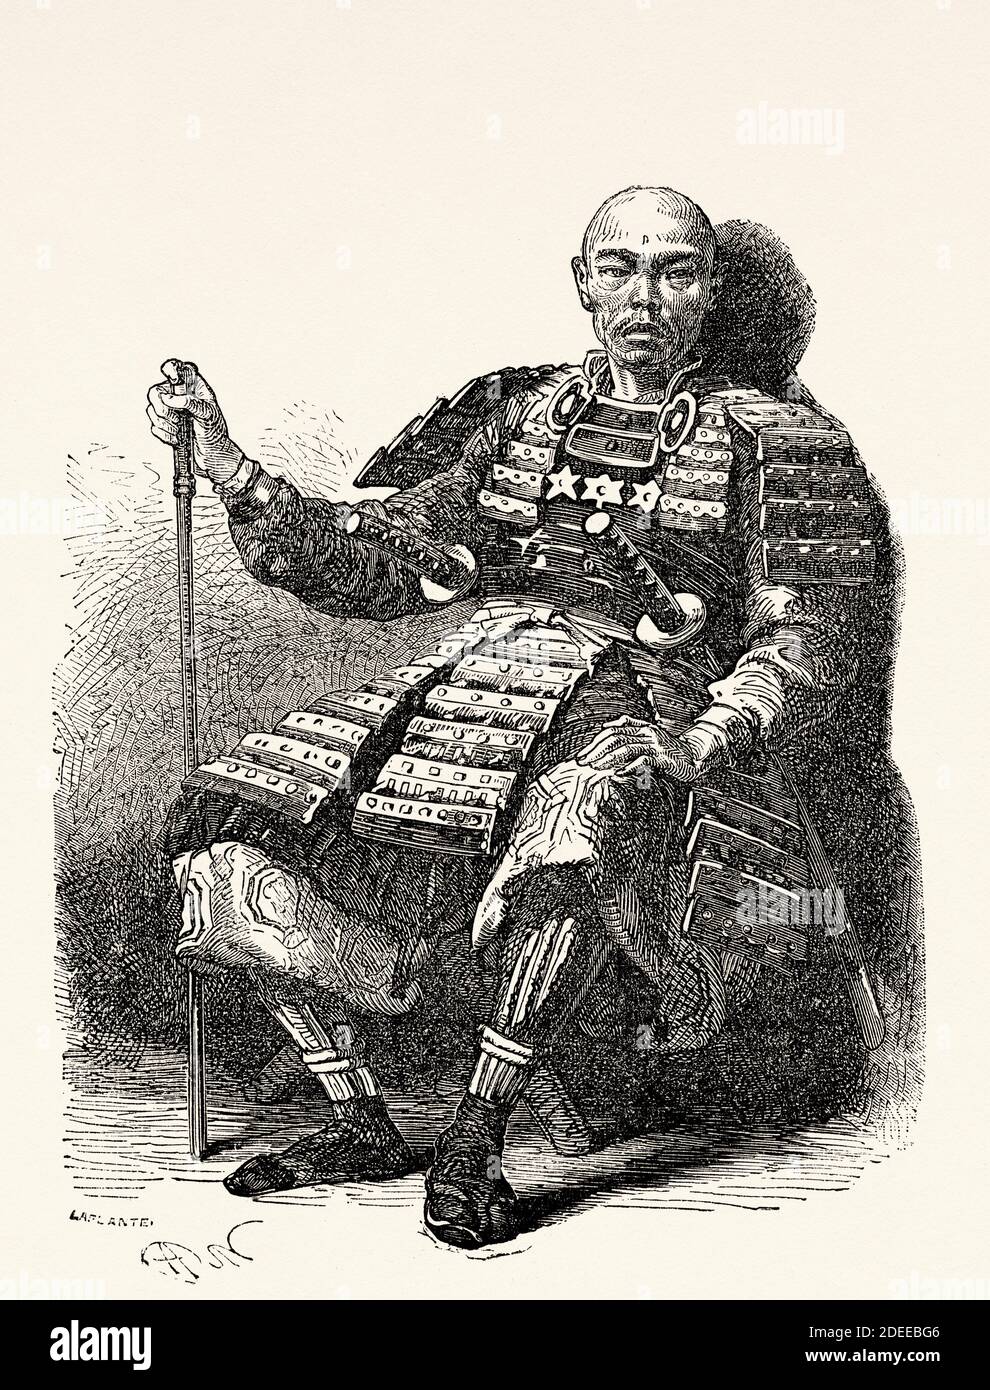 Taikosama. Fide-Yosi, famous general of the Japanese imperial army, Japan. Old 19th century engraved illustration Travel to Japan by Aime Humbert  from El Mundo en La Mano 1879 Stock Photo